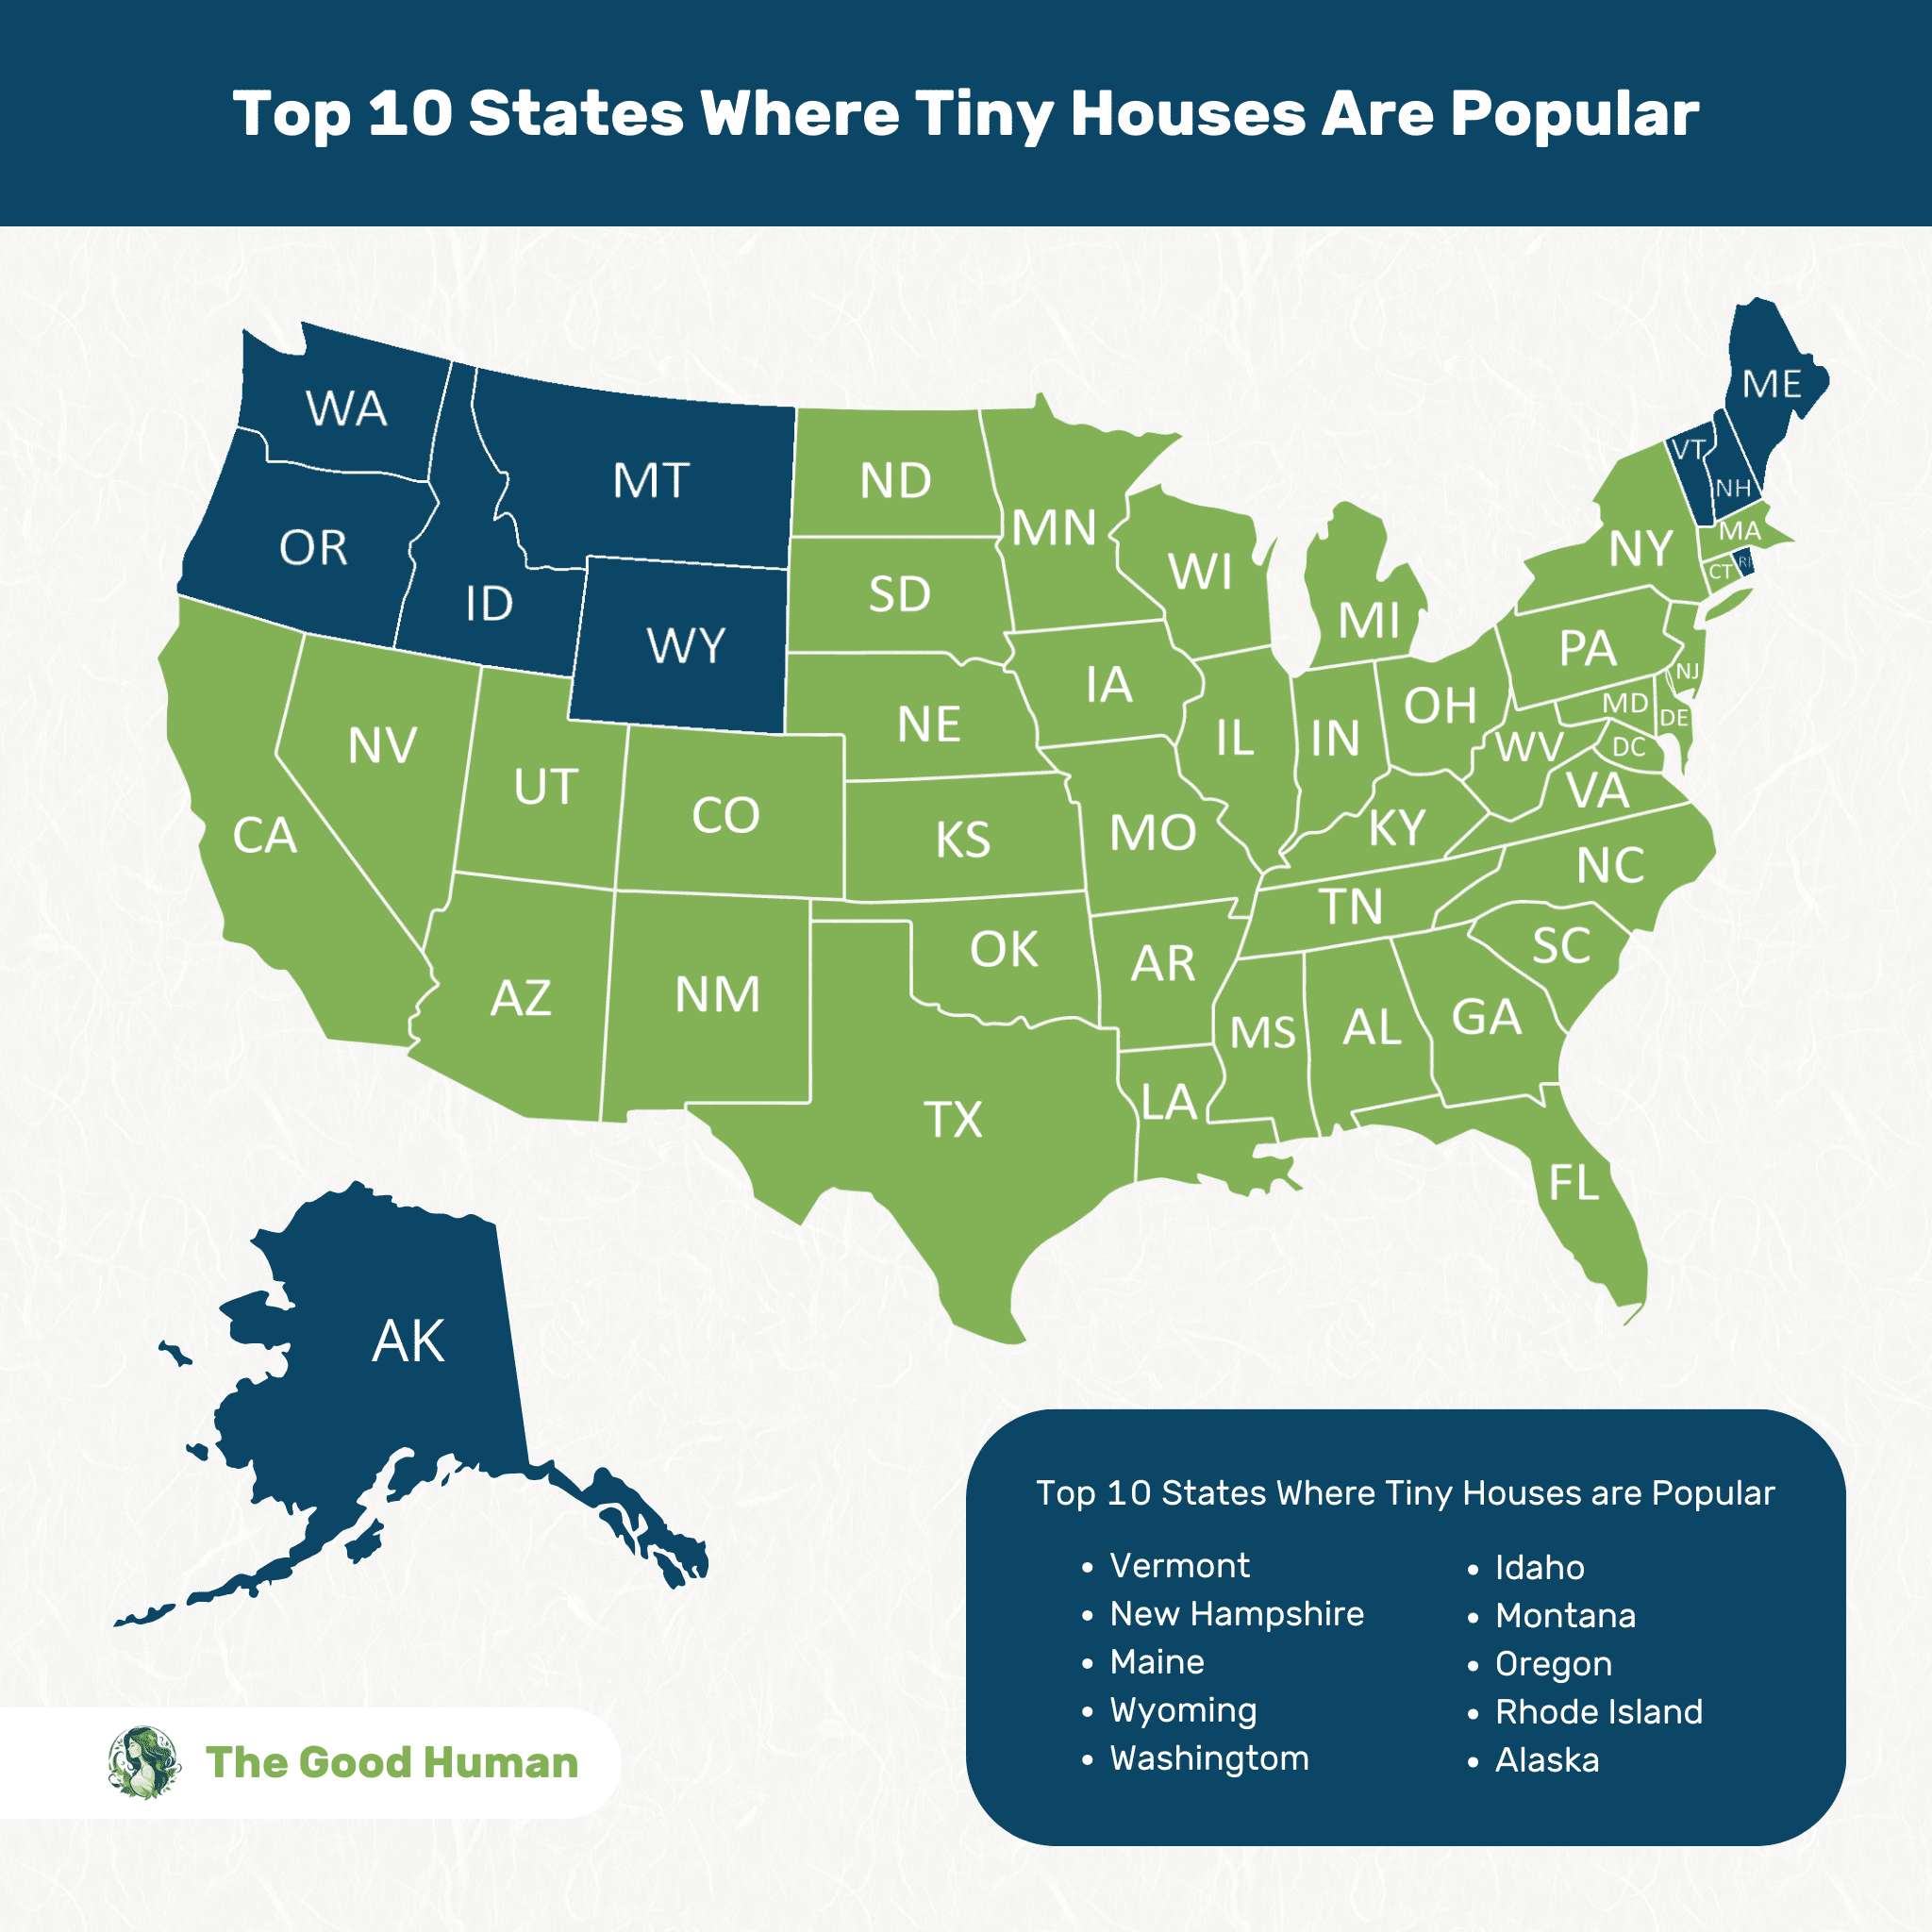 Map of the top 10 states in the U.S. where tiny houses are popular